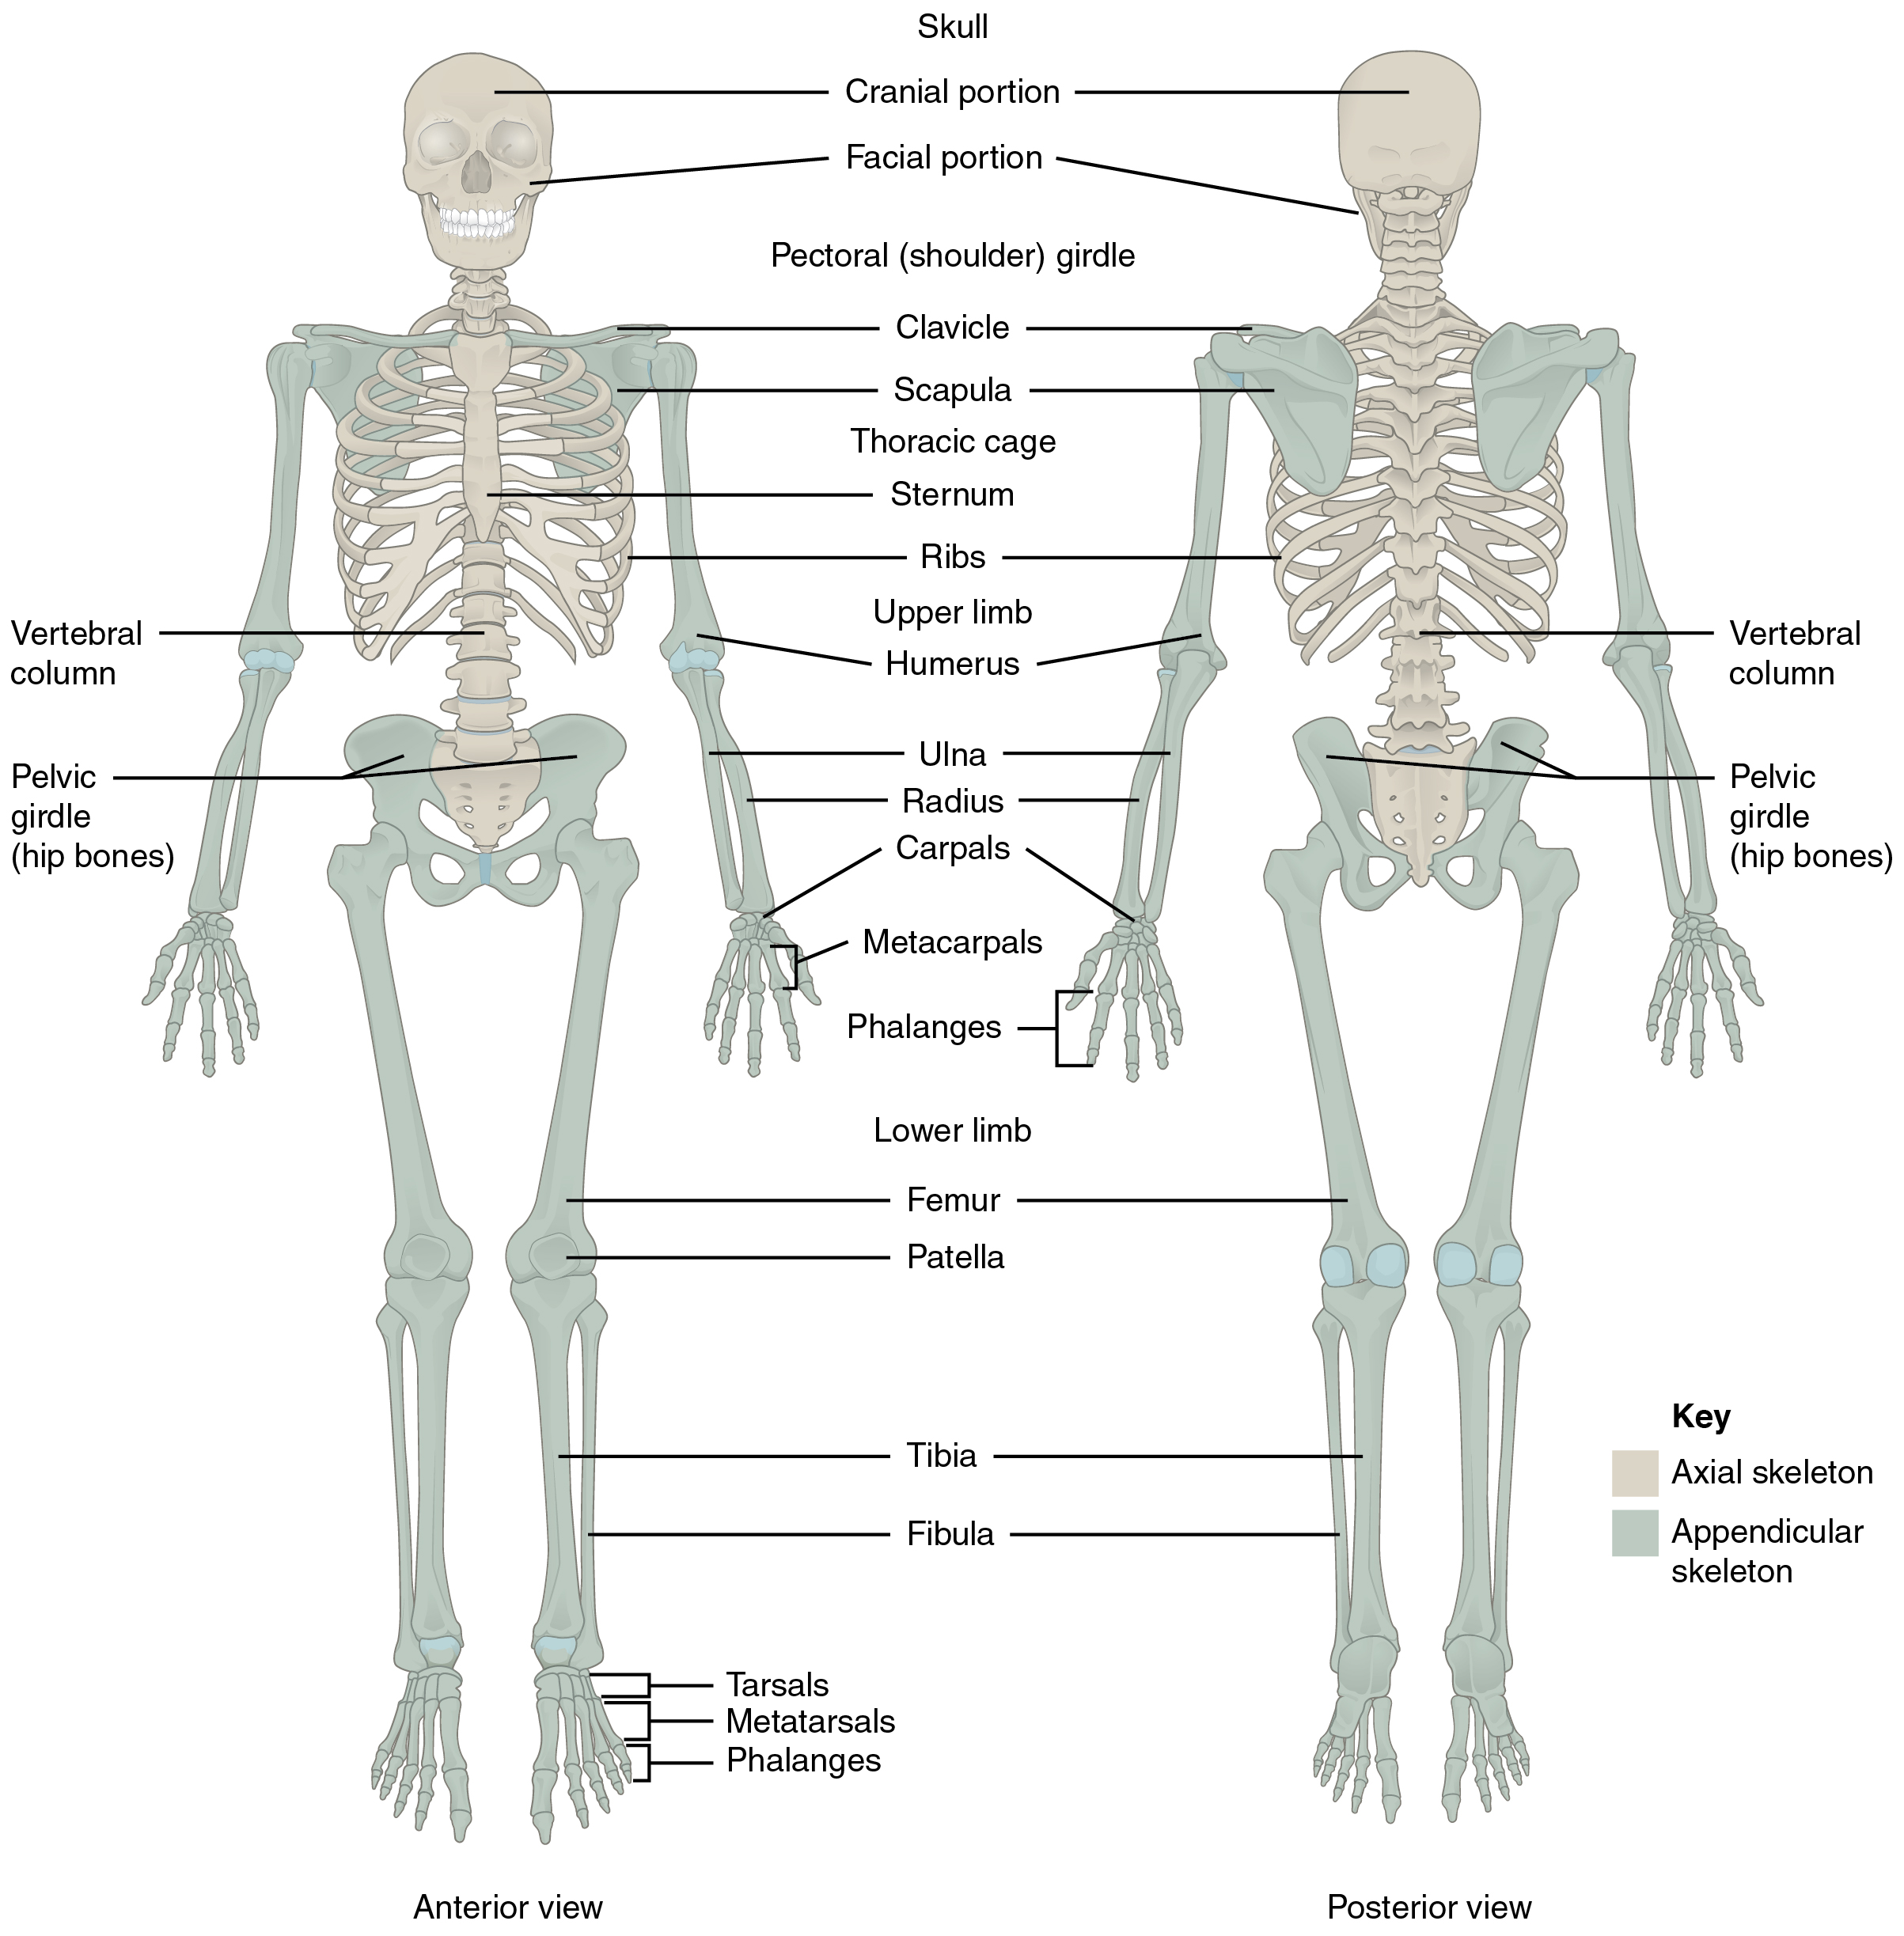 This diagram shows the human skeleton and identifies the major bones. The left panel shows the anterior view (from the front) and the right panel shows the posterior view (from the back).